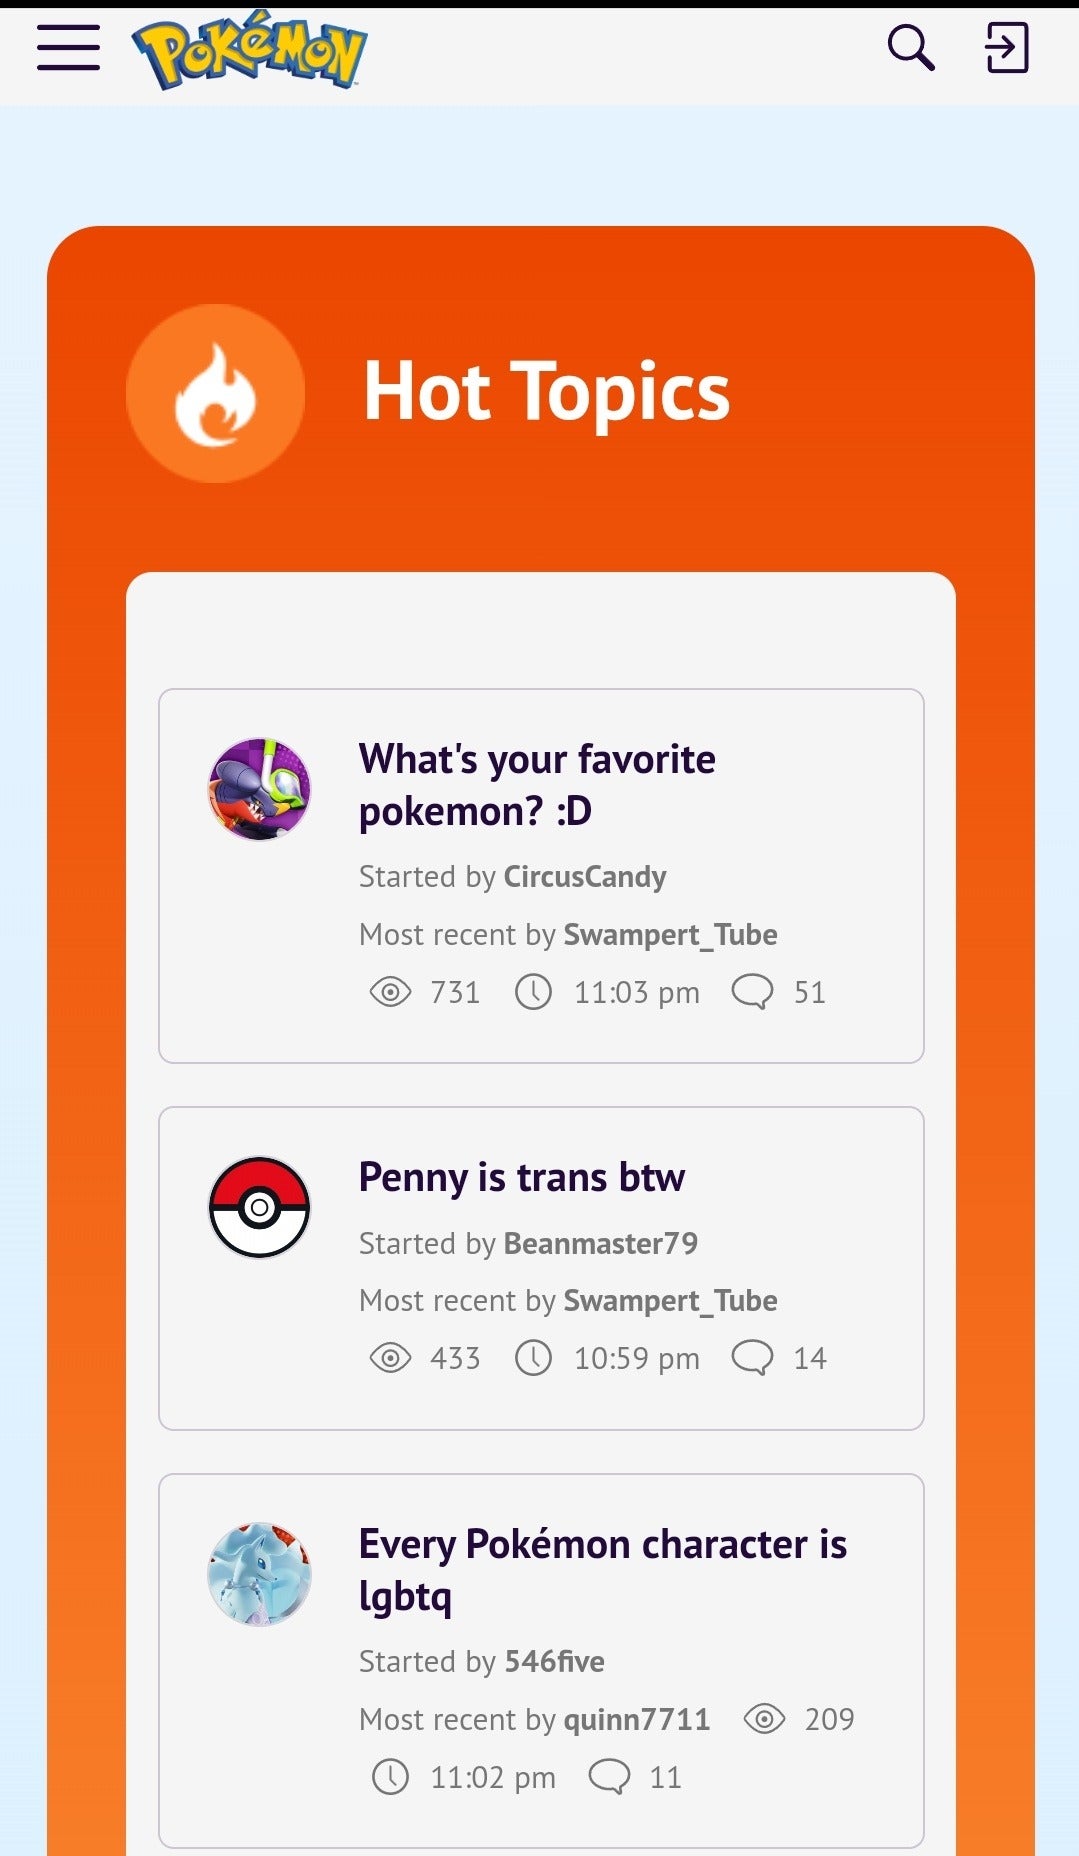 Forum topics are displayed, incl "penny cross by the way," And "Every Pokémon character is LGBtq."